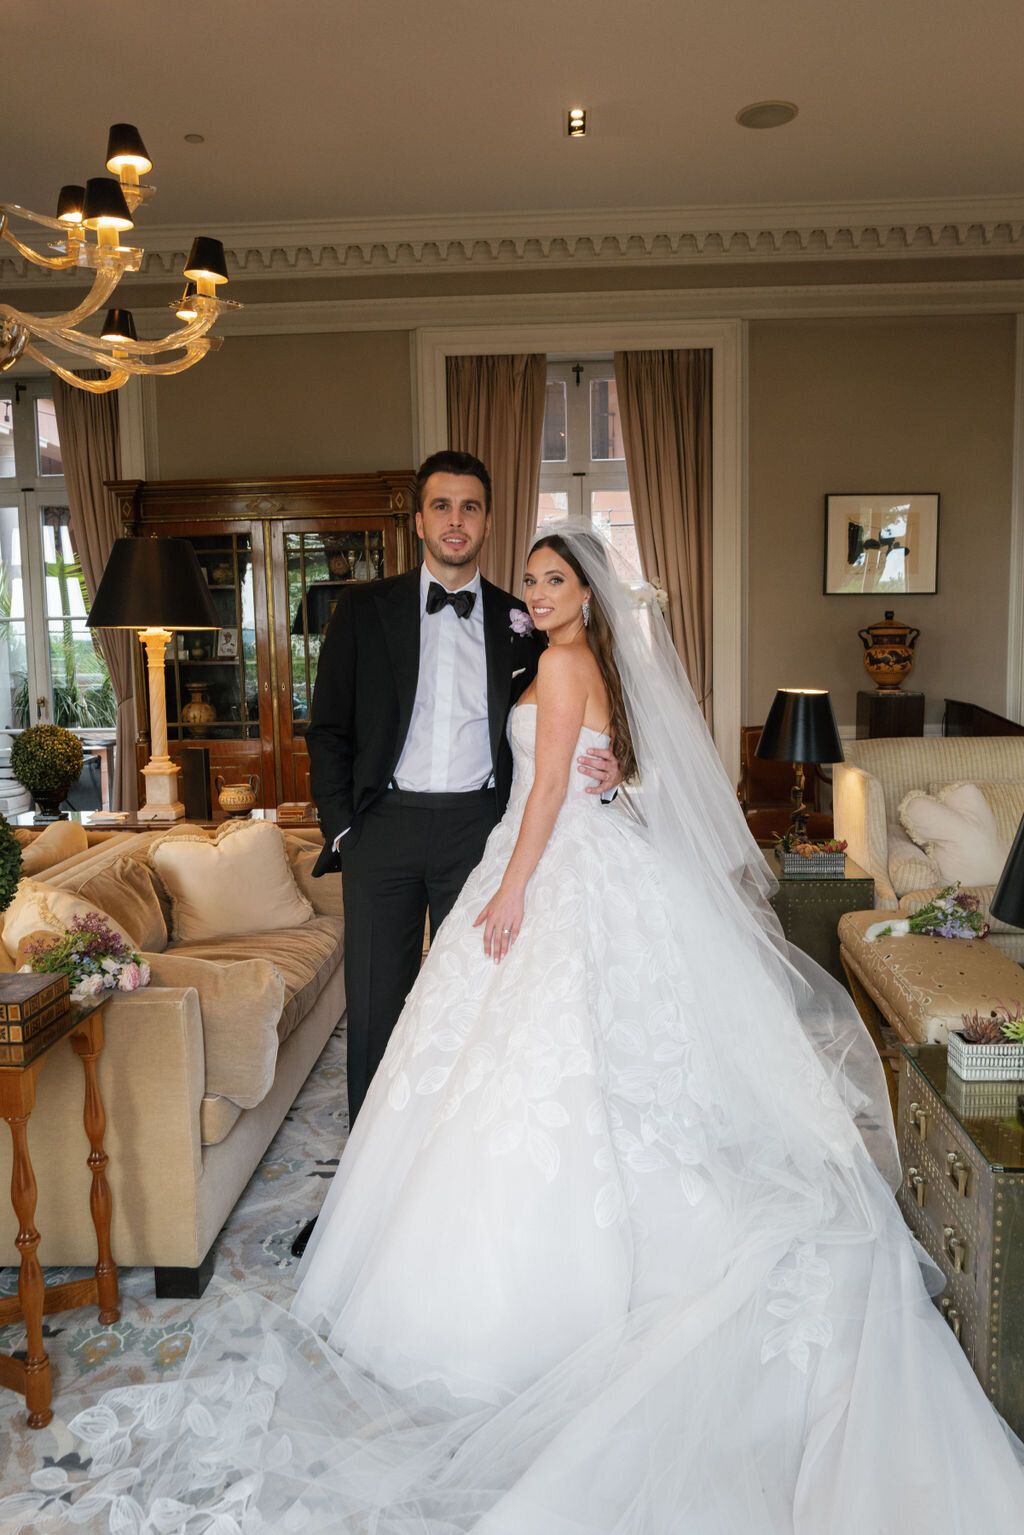 Bride and Groom Portraits at Glenmere Mansion Wedding